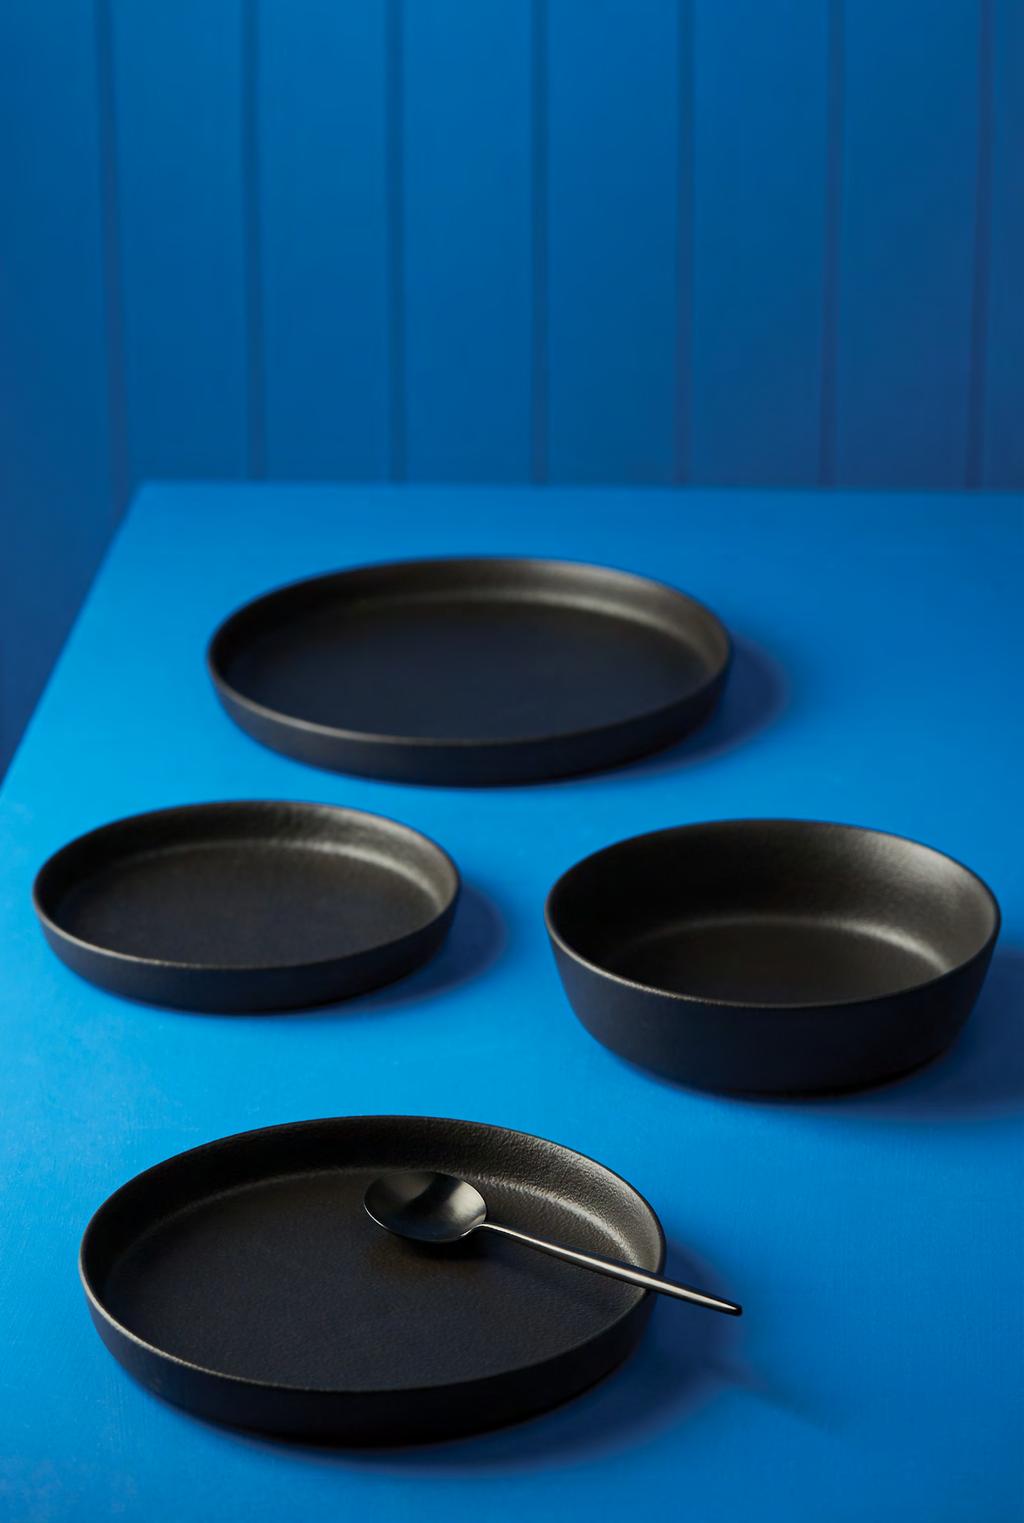 industry BUILT TO LAST Simple black clay dinnerware makes a bold statement and Industry is no exception.